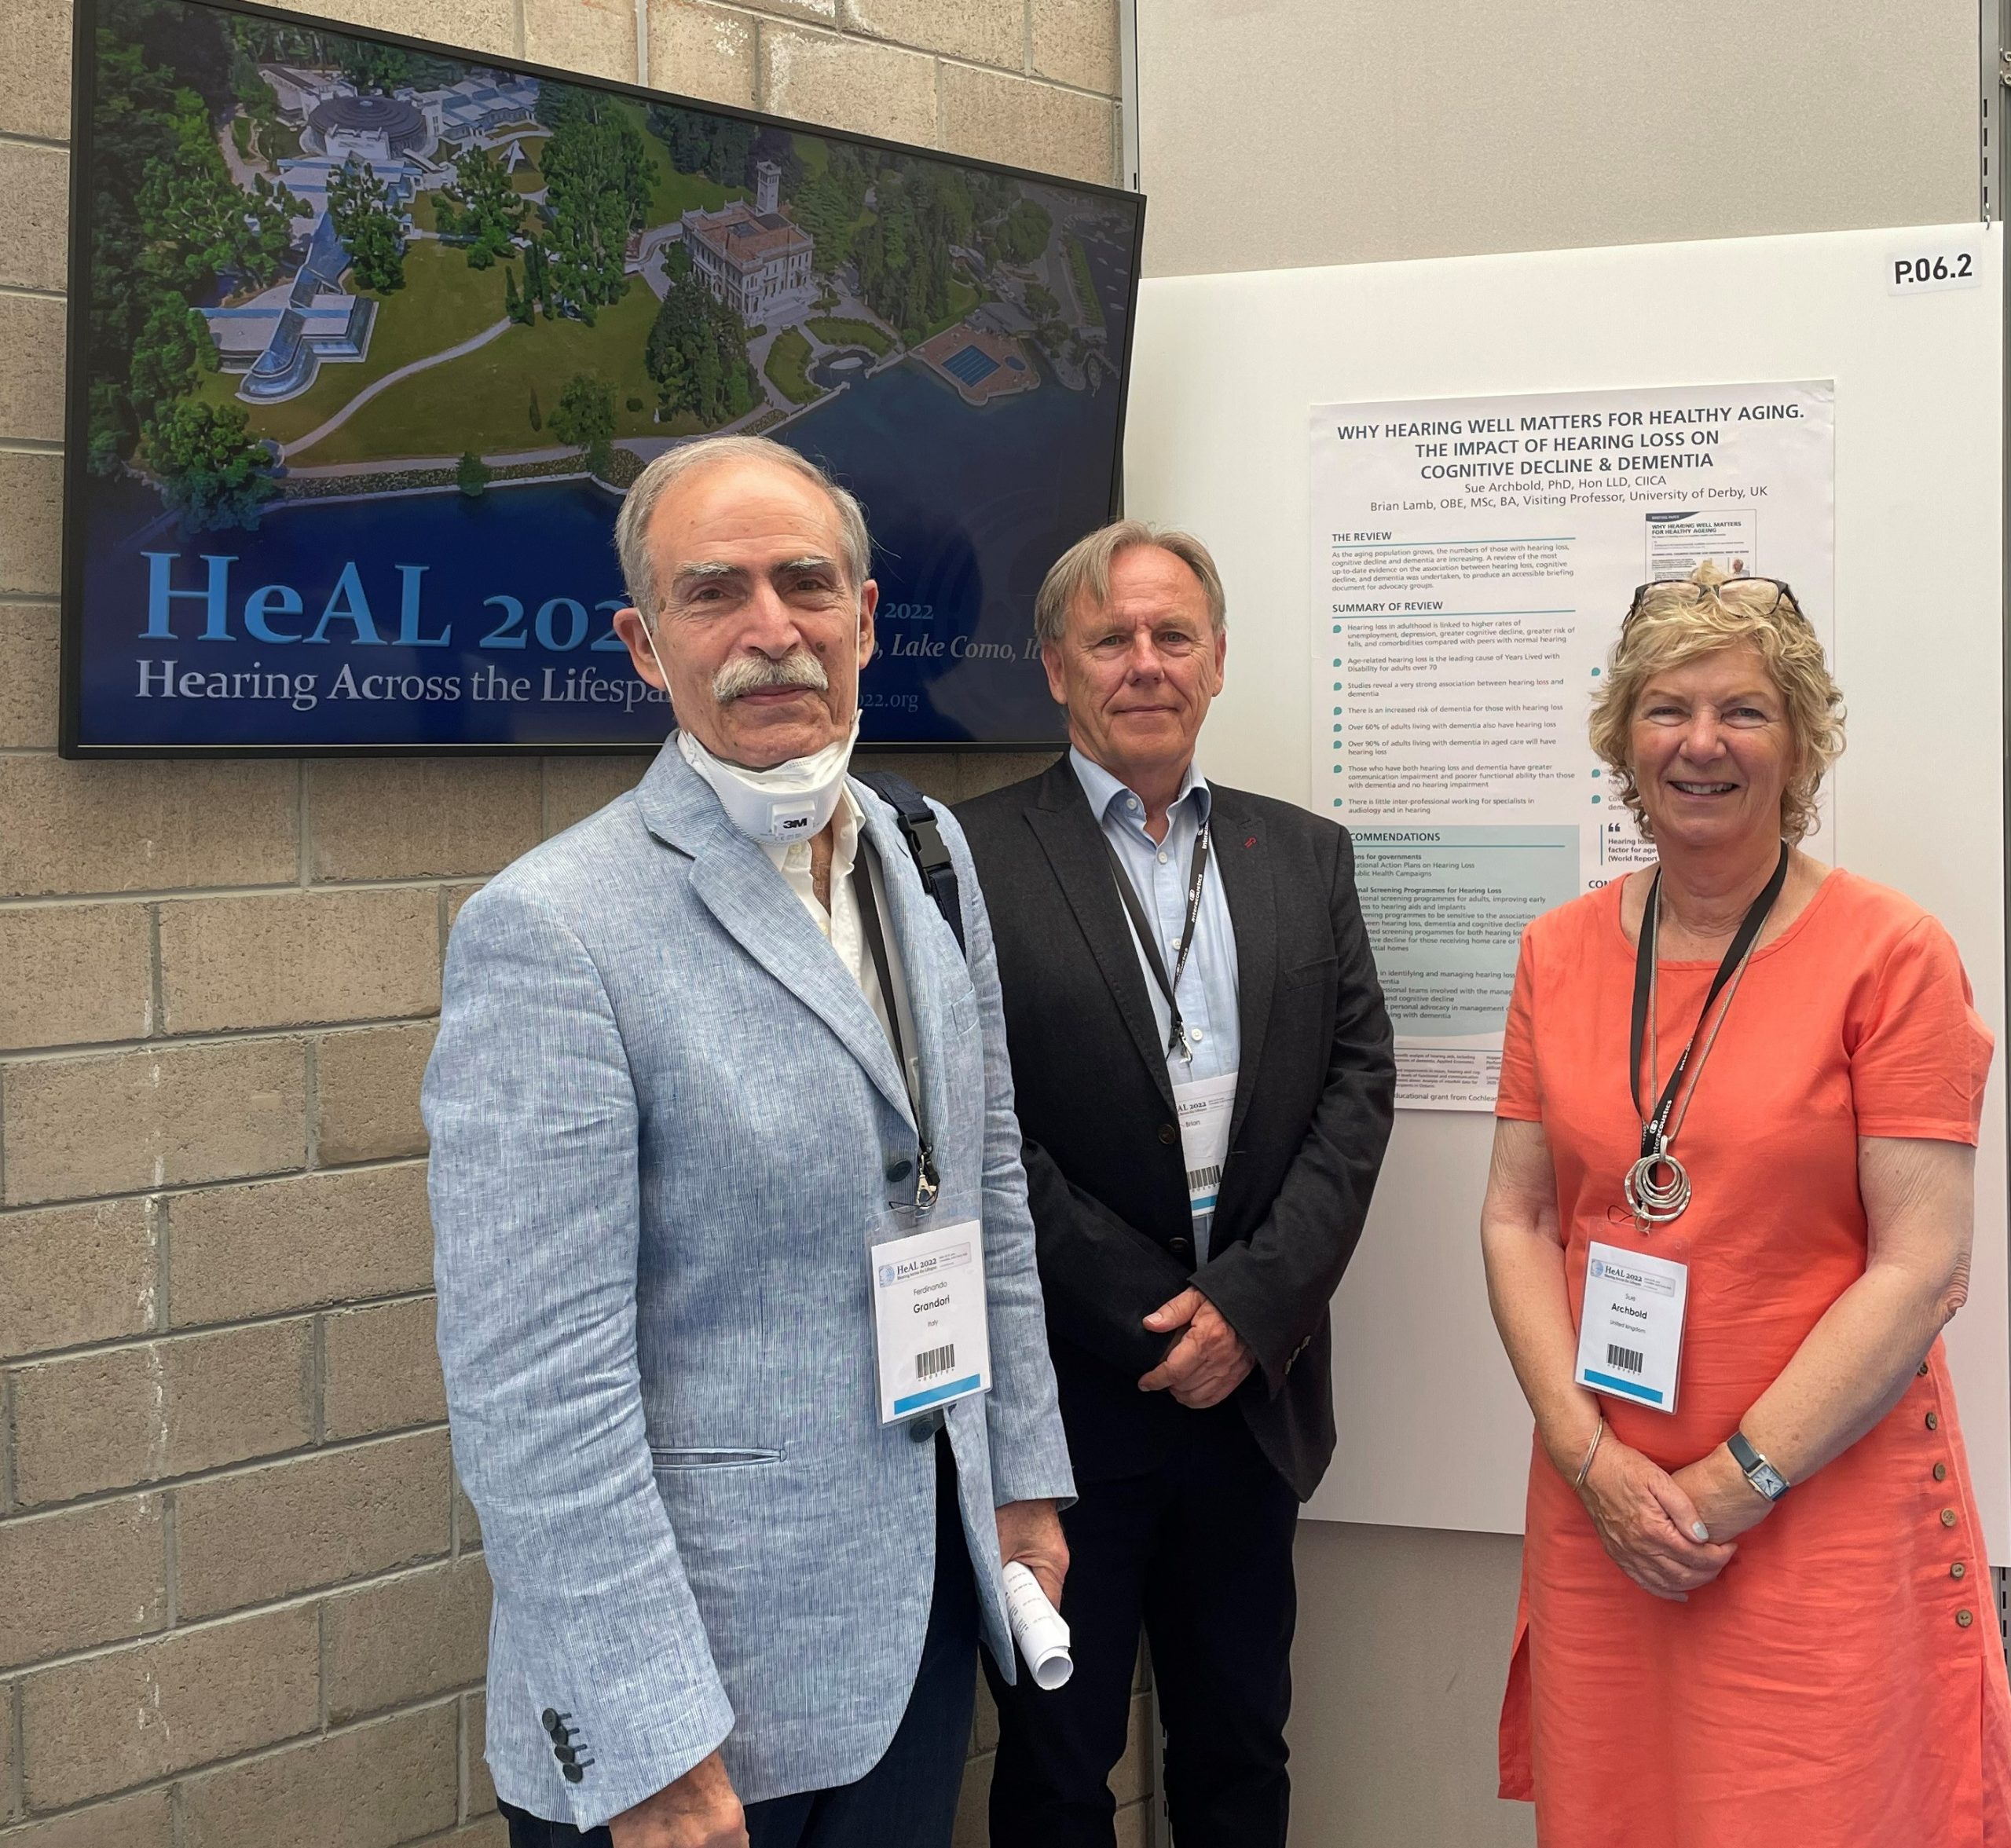 CIICA NETWORK MEETS AND PRESENTS AT HEAL CONFERENCE, COMO